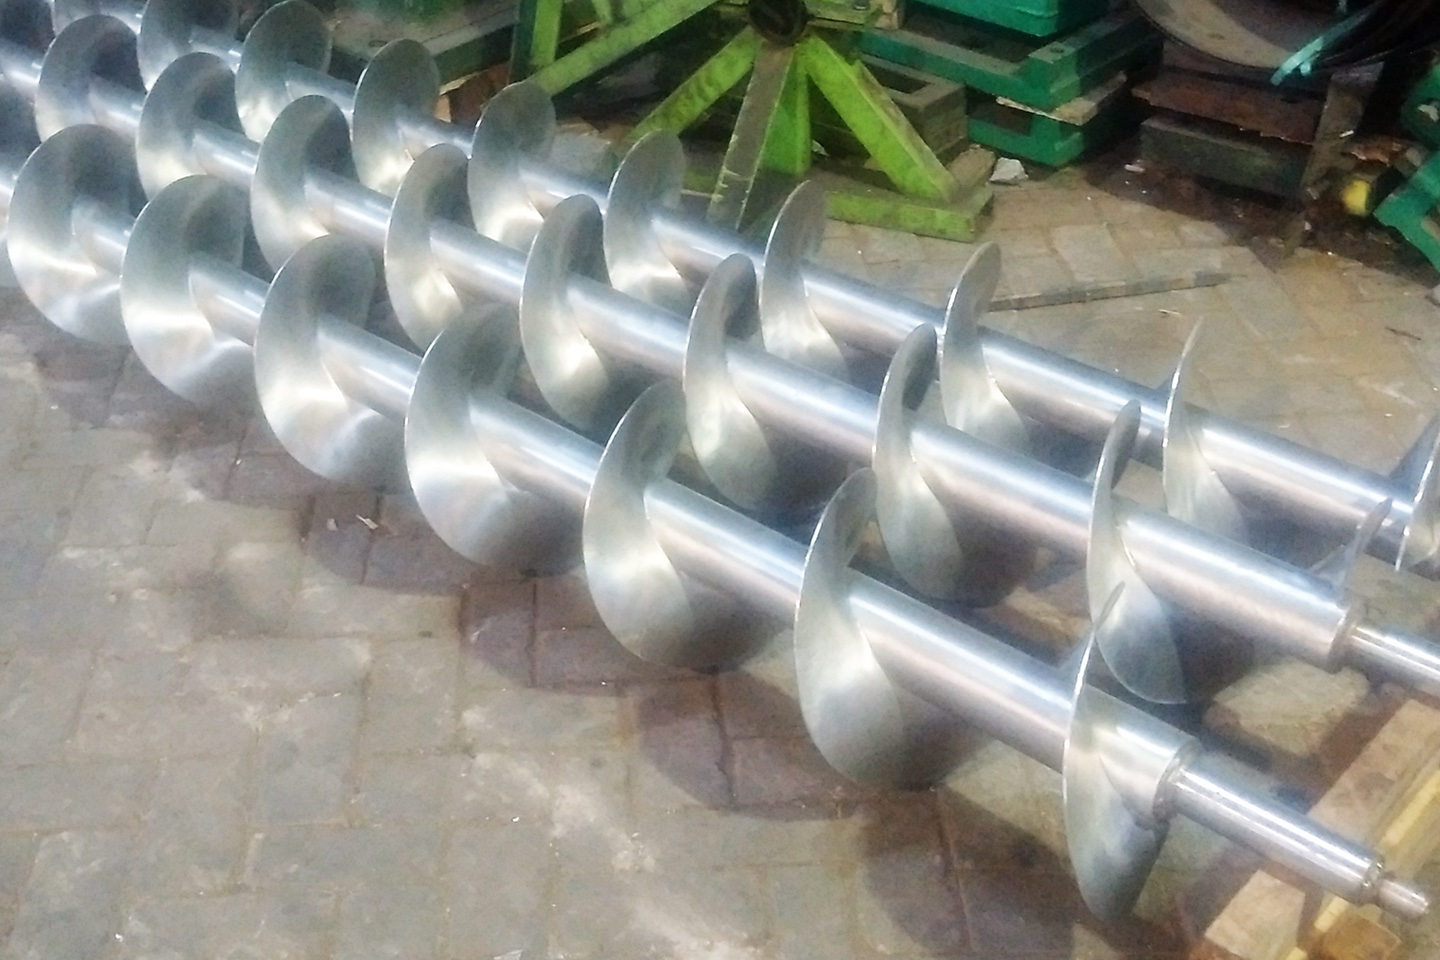 Special parts for a food processing company